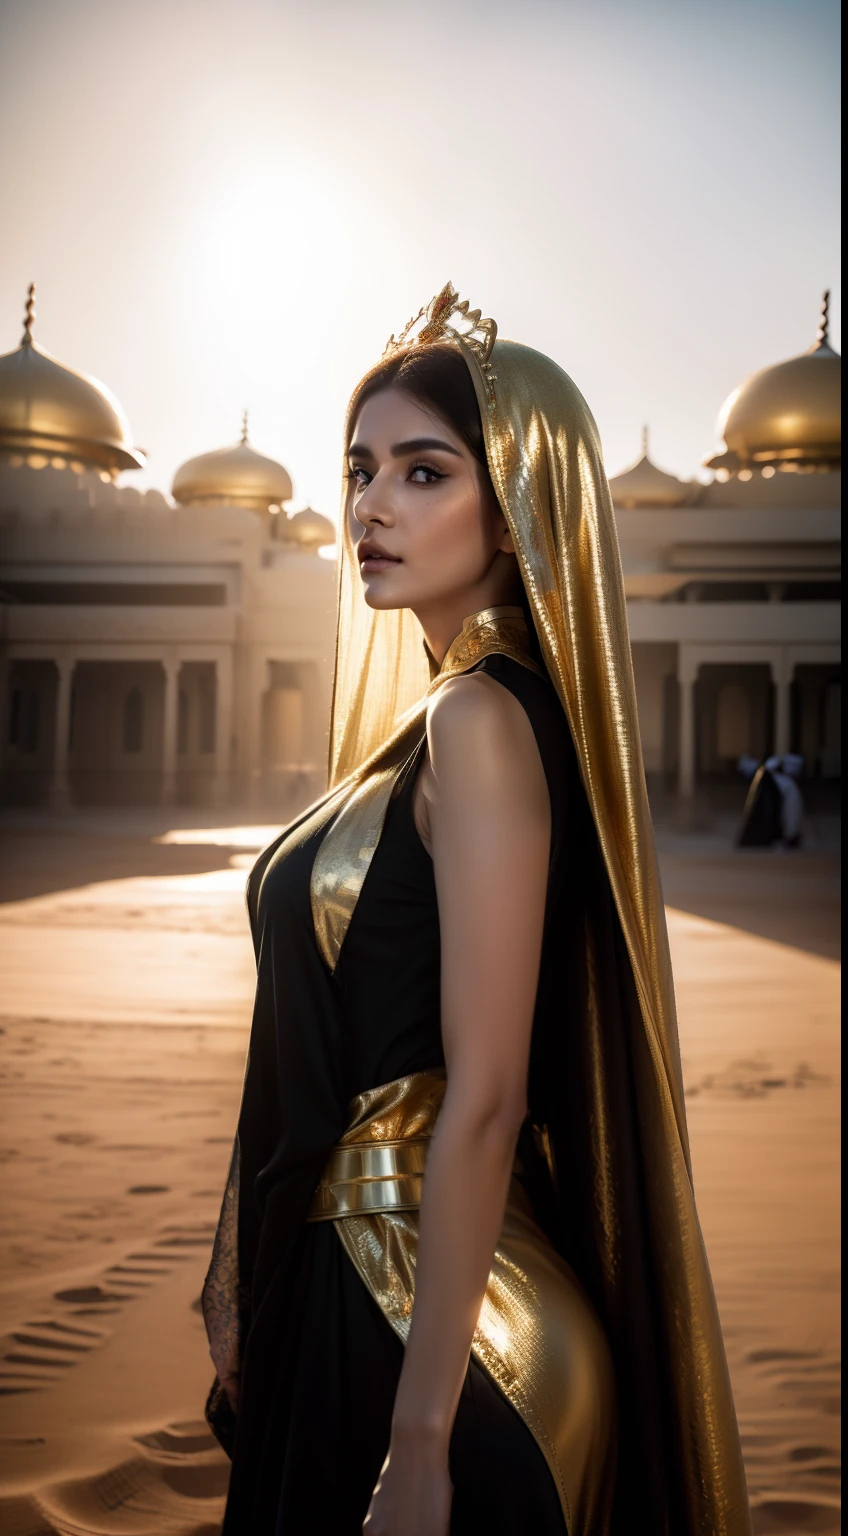 photore (arabian princess:1.5) Stand on a background in full palatial outfit (Cyberpunk desert:1.3), (Exotic royal palace:1.5) and (Sunset sky:1.2). Wearing a complex headscarf, Long vest，Gold embroidery and jewelry, Detailed face and eyes, (Highly detailed:1.4), 8K, Photorealistic, (Long dark brown hair:1.2), (Young woman:1.1), author：Jeremy Mann, by Sandra Chevrier, author：Maciej Kuciara, (shadows  and highlights:1.3), Real Shadow, 。.3D, (Golden hour lighting:1.3), (author：Michelangelo:0.9), Art stands and deviant art, Greg Rutkowski and Alphonse Mucha